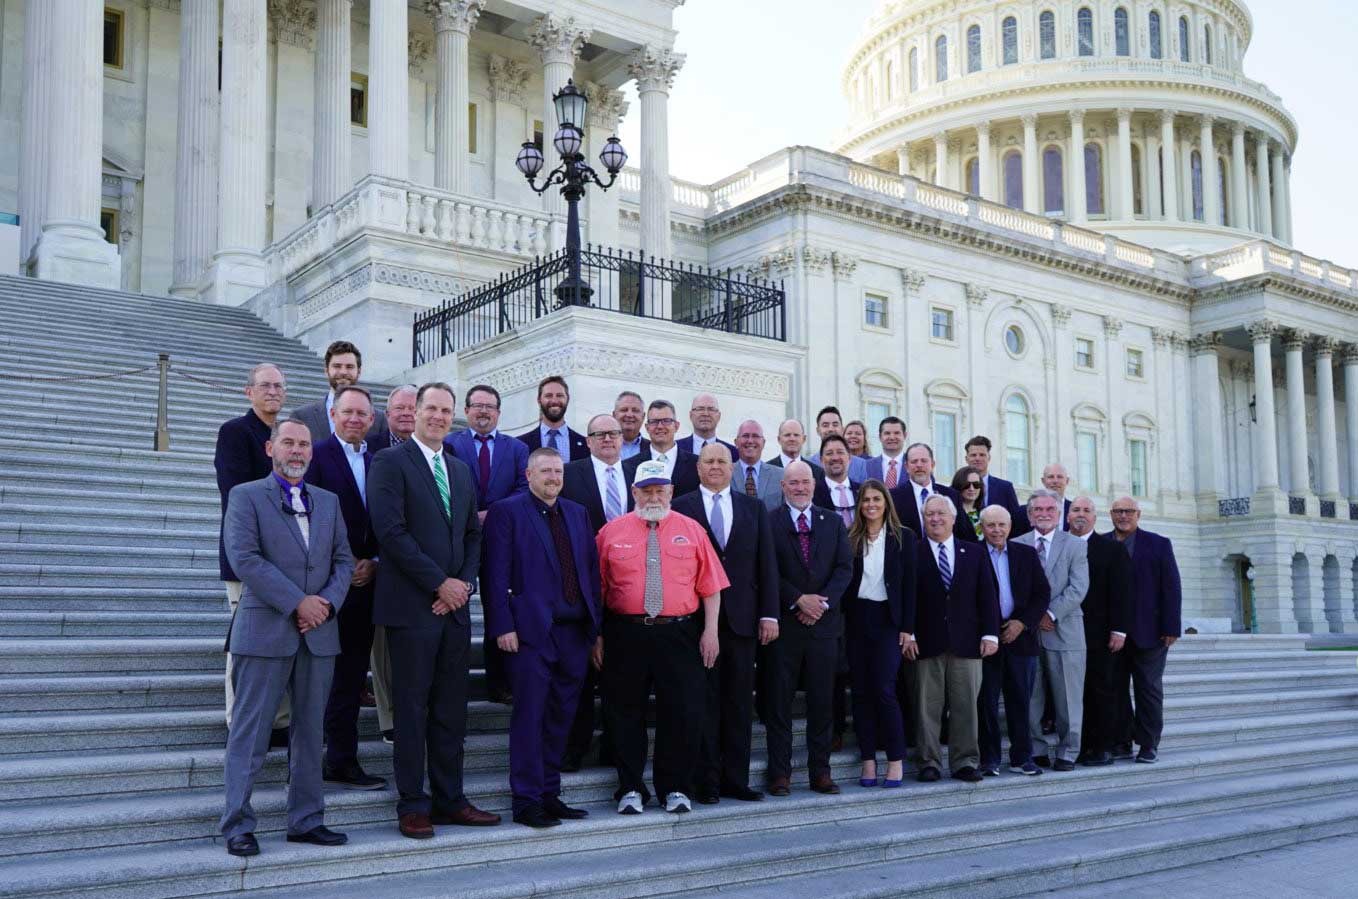 Group of American Sportfishing Association representatives in front of the U.S. Capitol. 